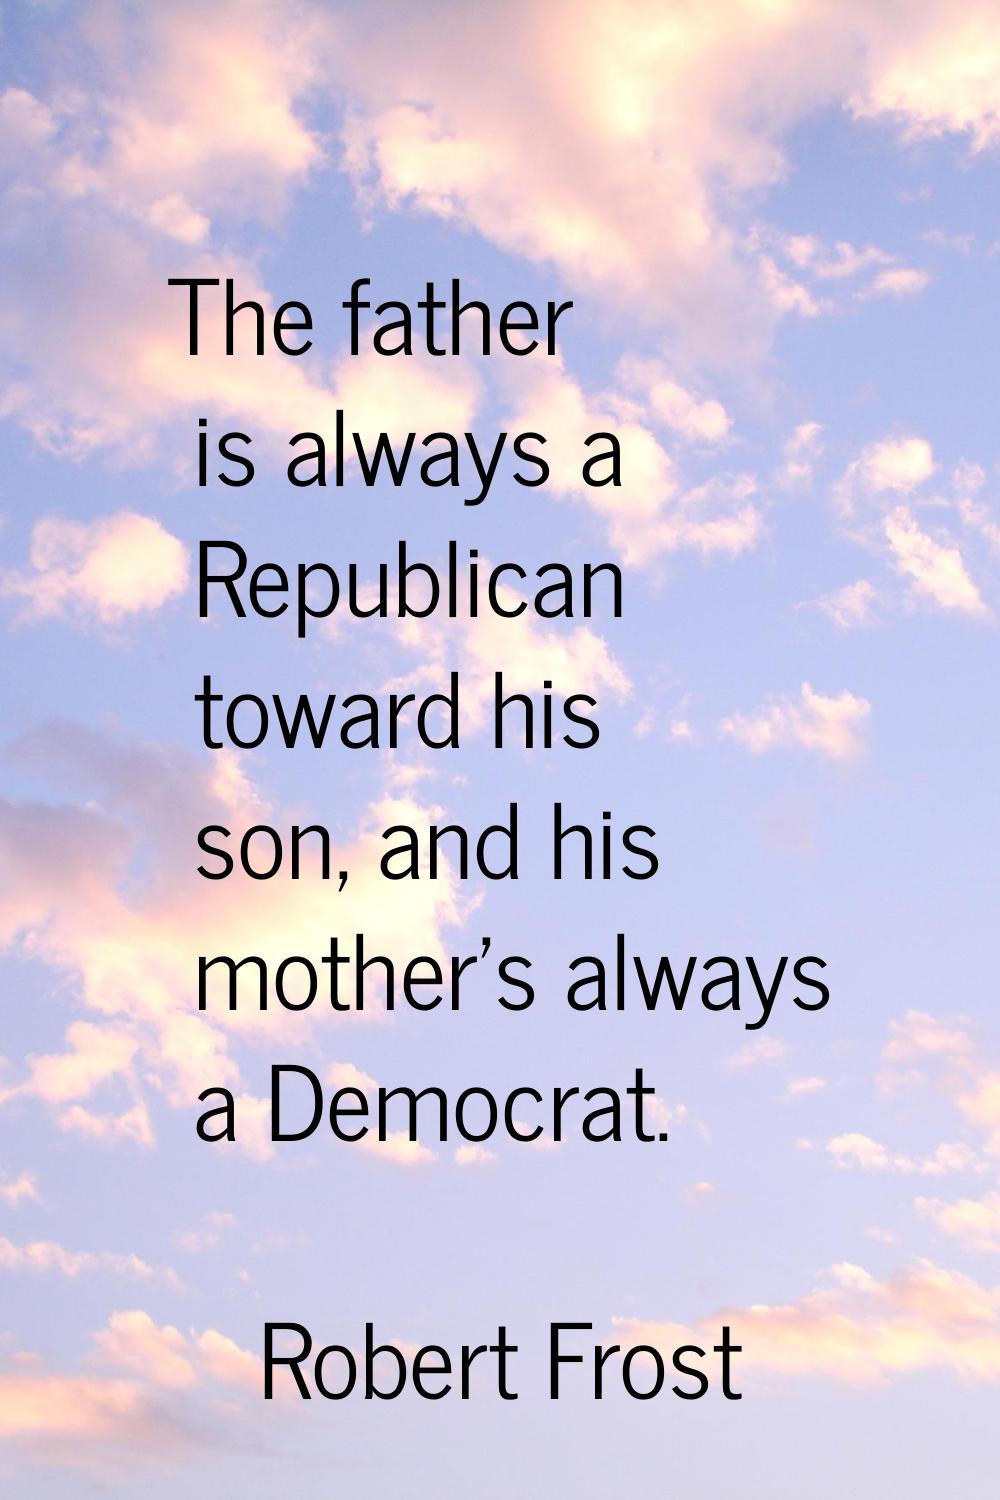 The father is always a Republican toward his son, and his mother's always a Democrat.